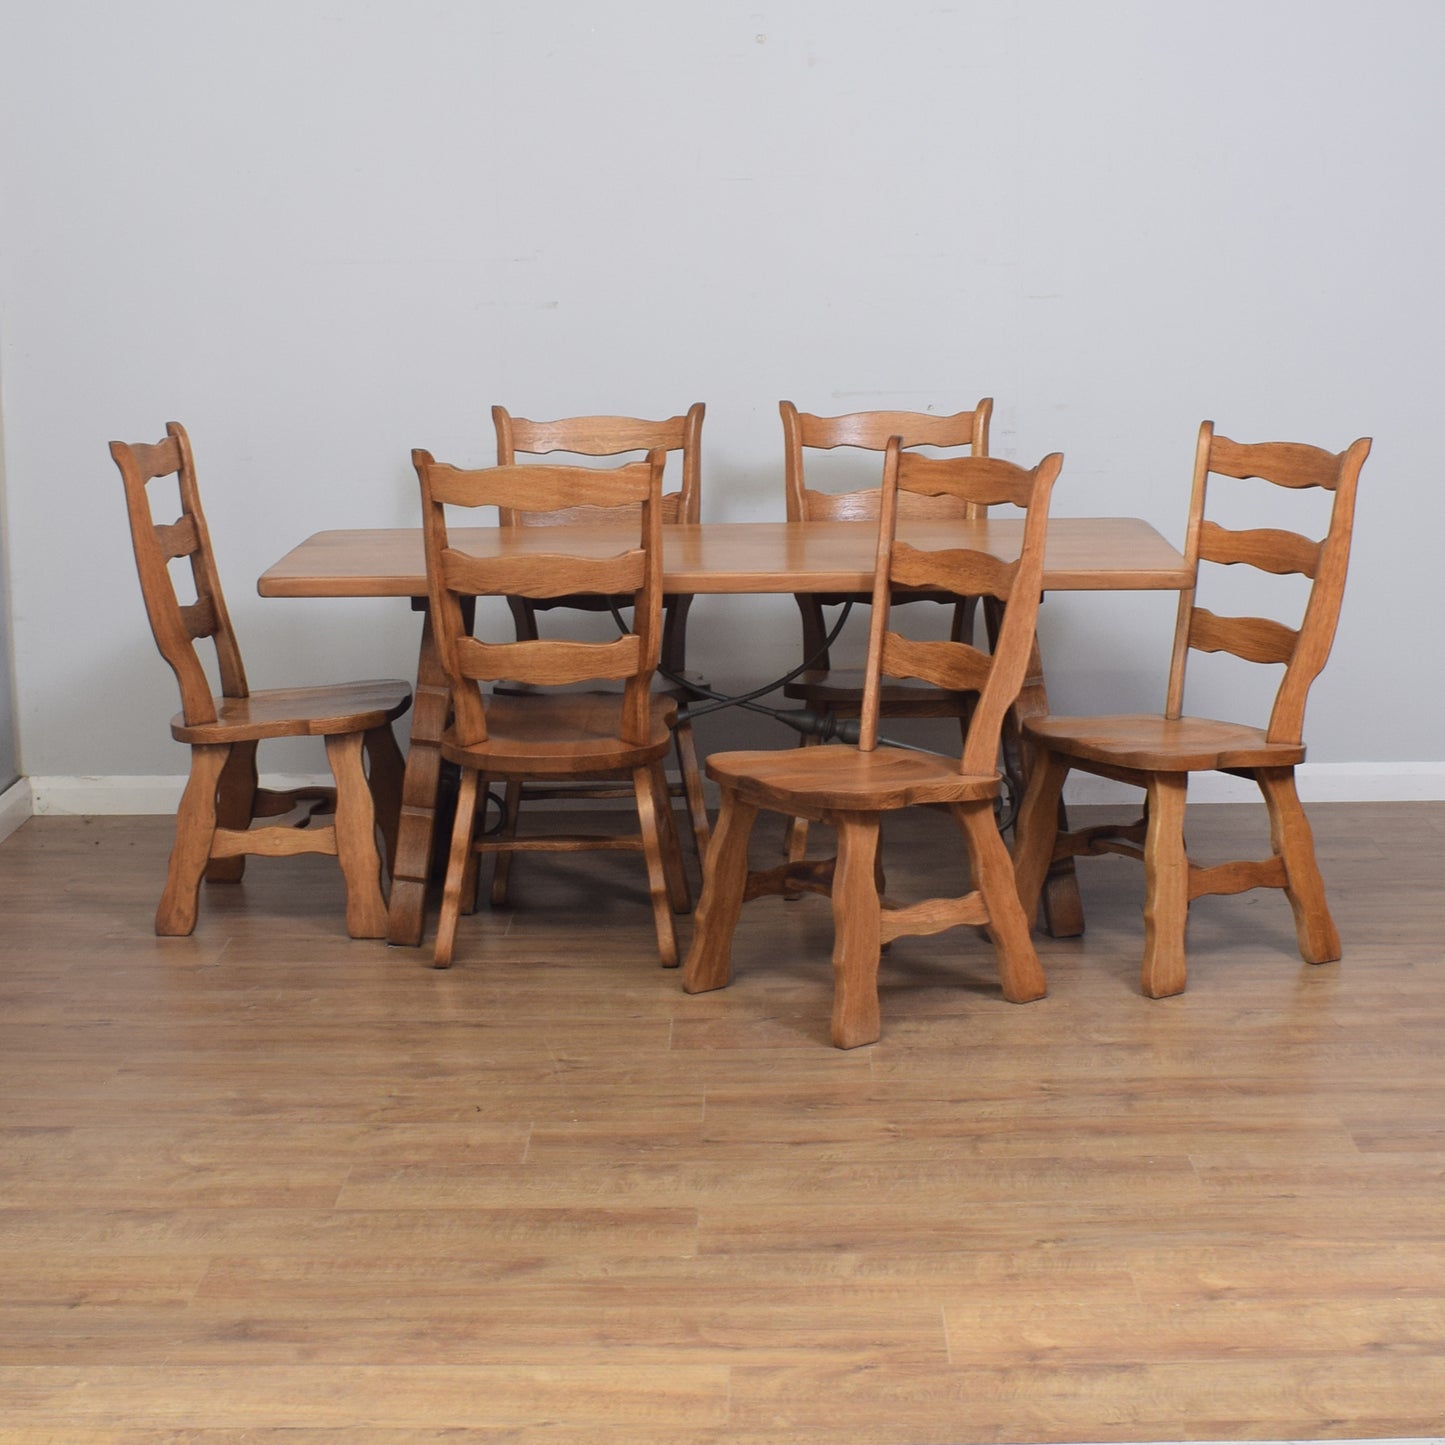 Solid Oak Table & Six Chairs